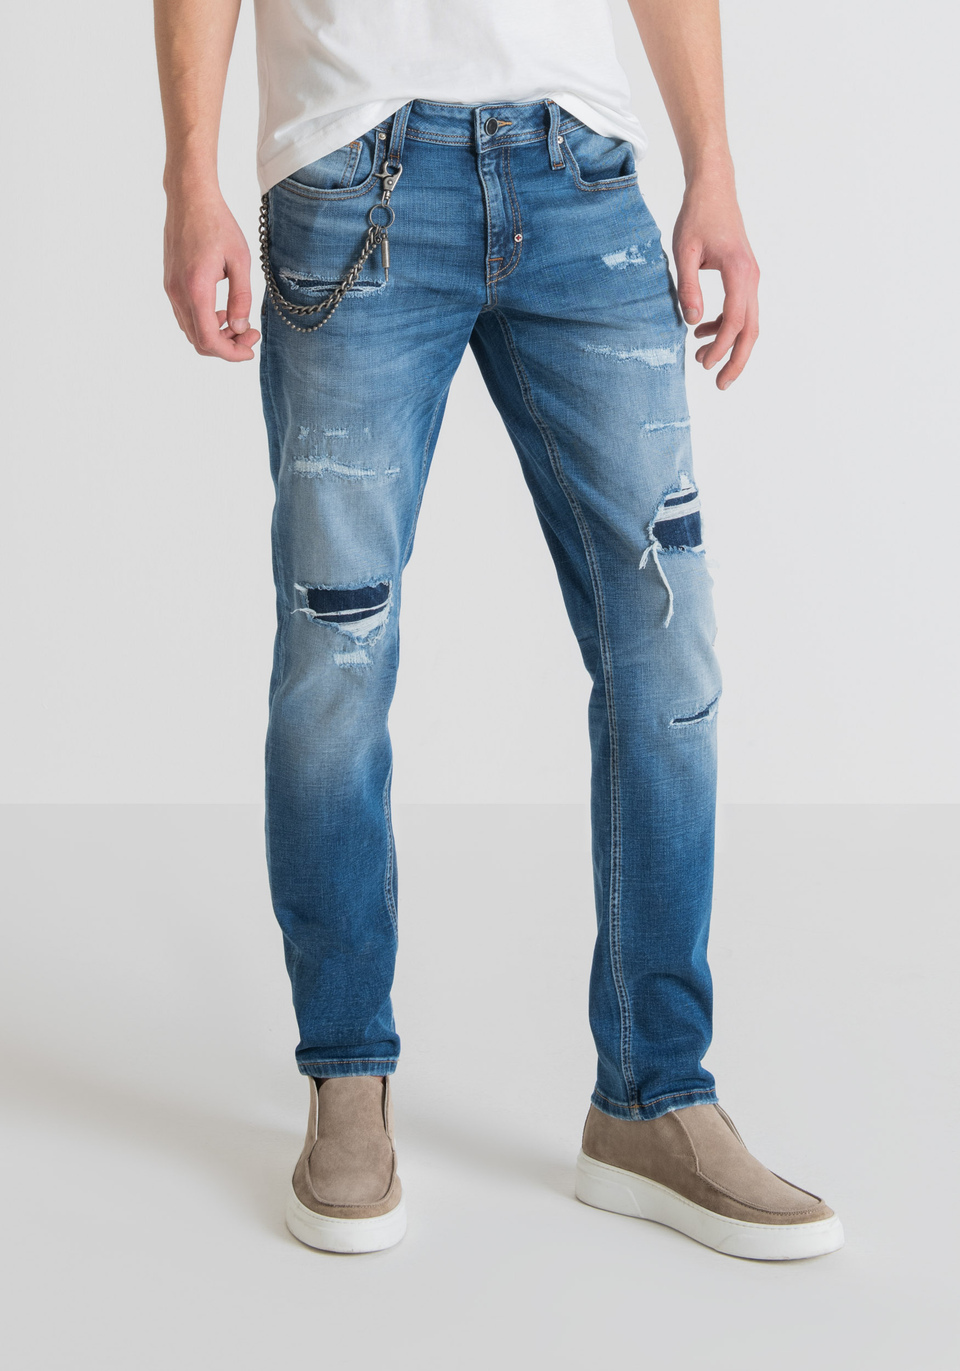 JEANS TAPERED FIT “IGGY” IN STRETCH DENIM - Antony Morato Online Shop